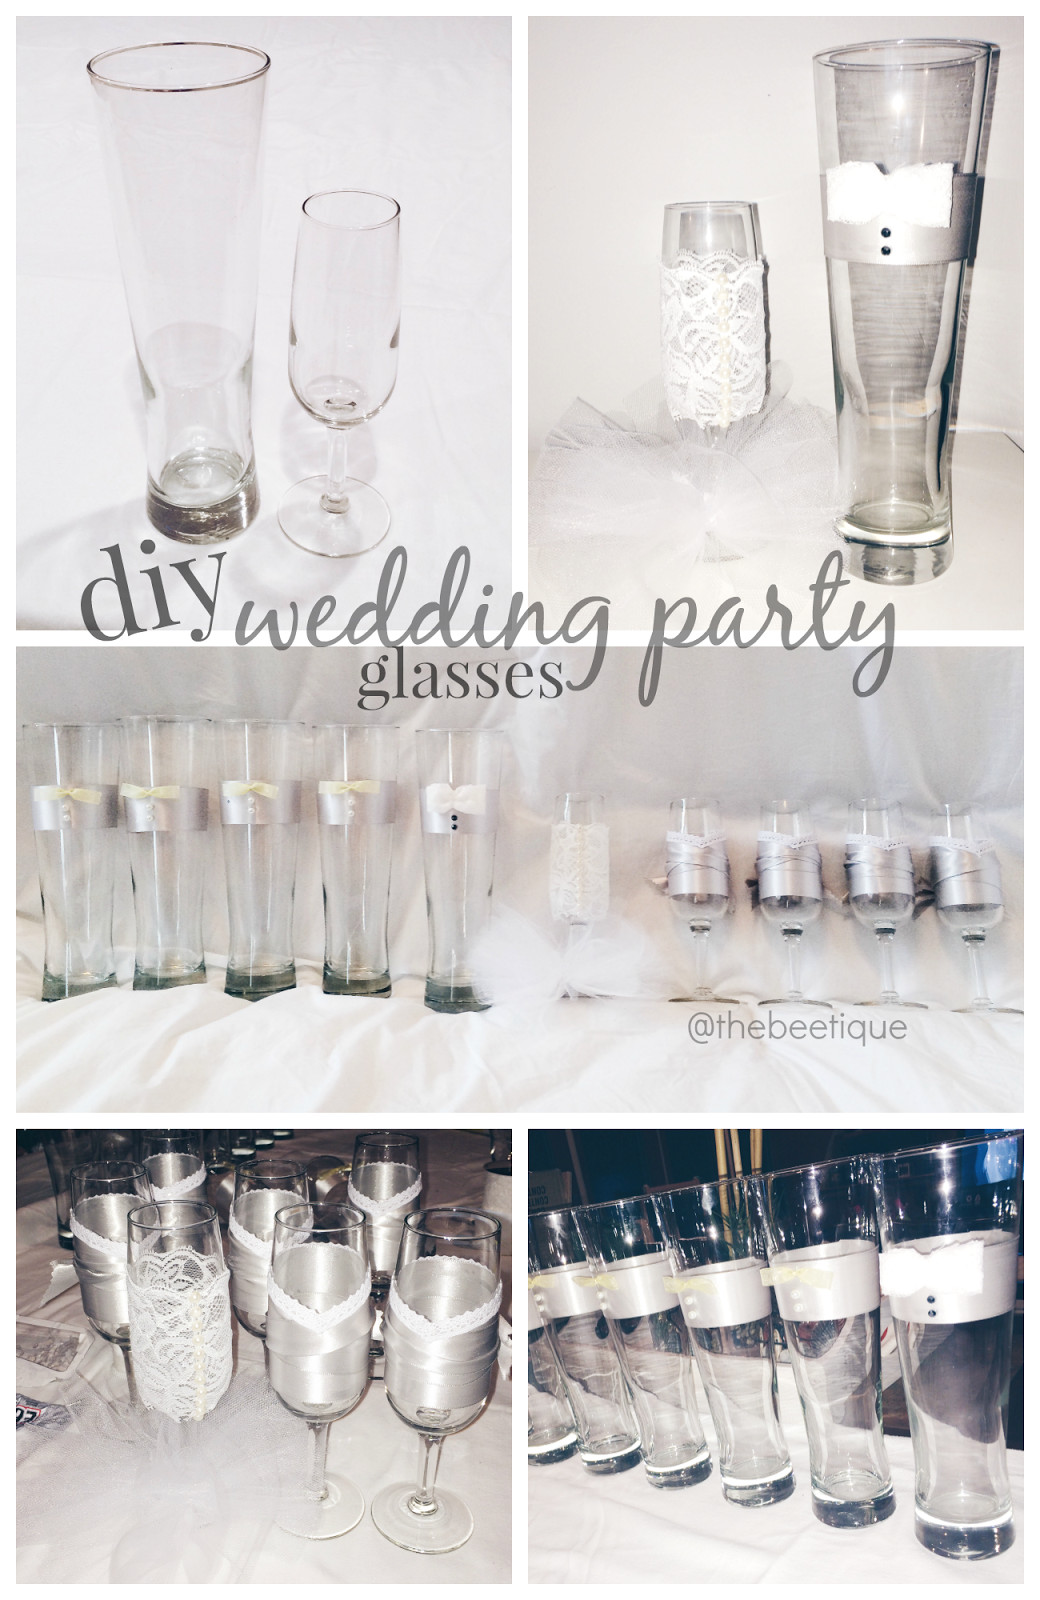 DIY Wedding Glasses
 The Beetique DIY Personalized Wedding Party Glasses